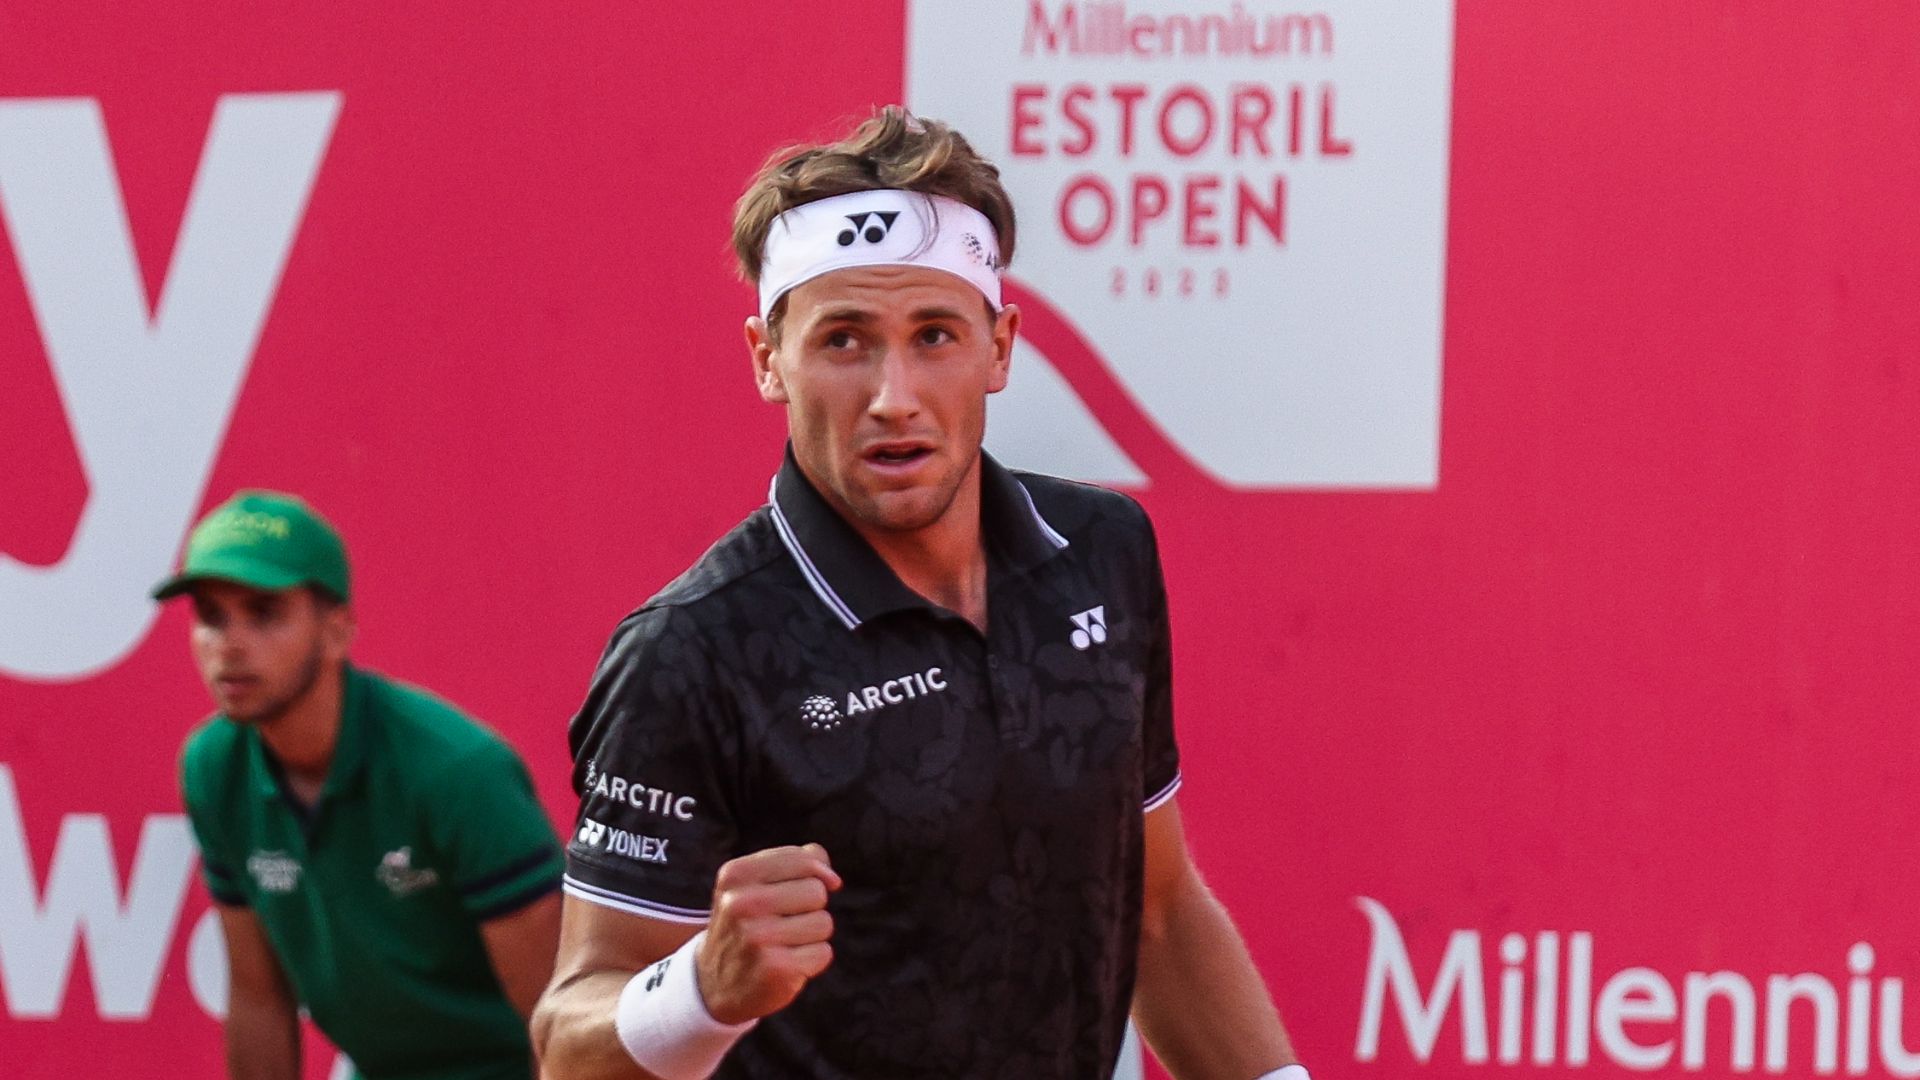 Ruud to face Kecmanovic in Estoril Open final, beIN SPORTS